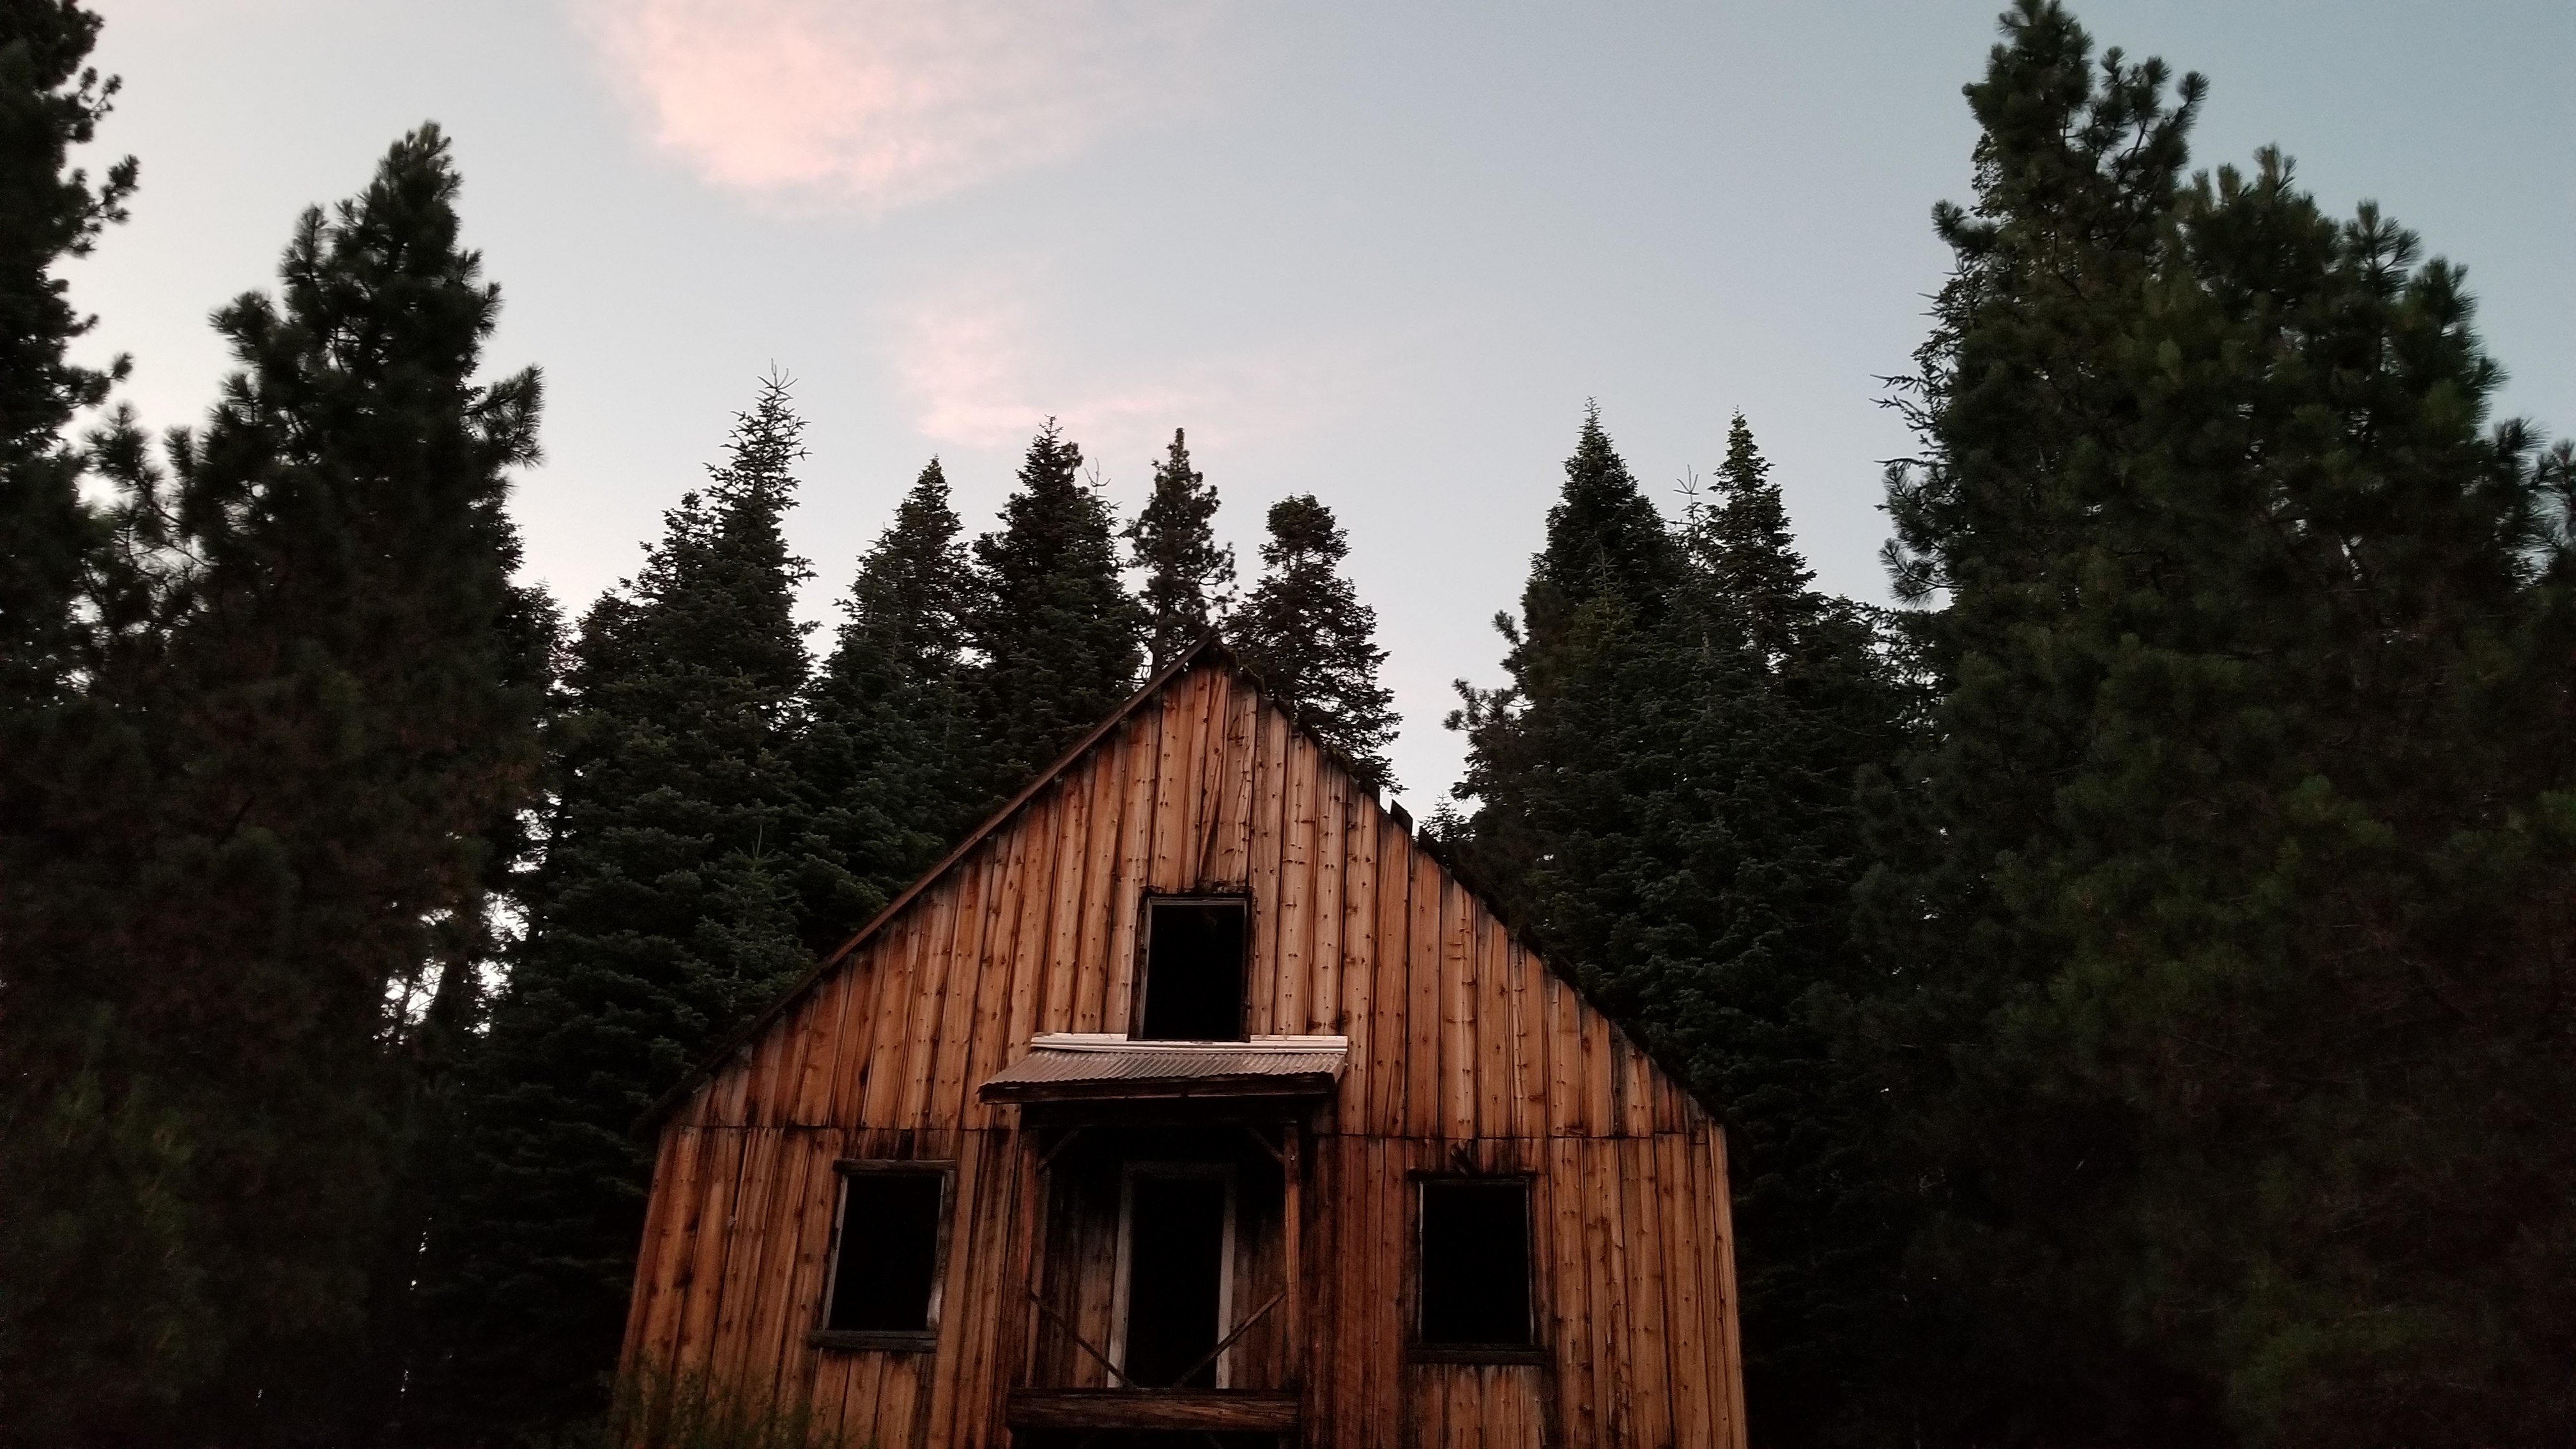 General 4032x2268 forest pine trees wood winter house cabin